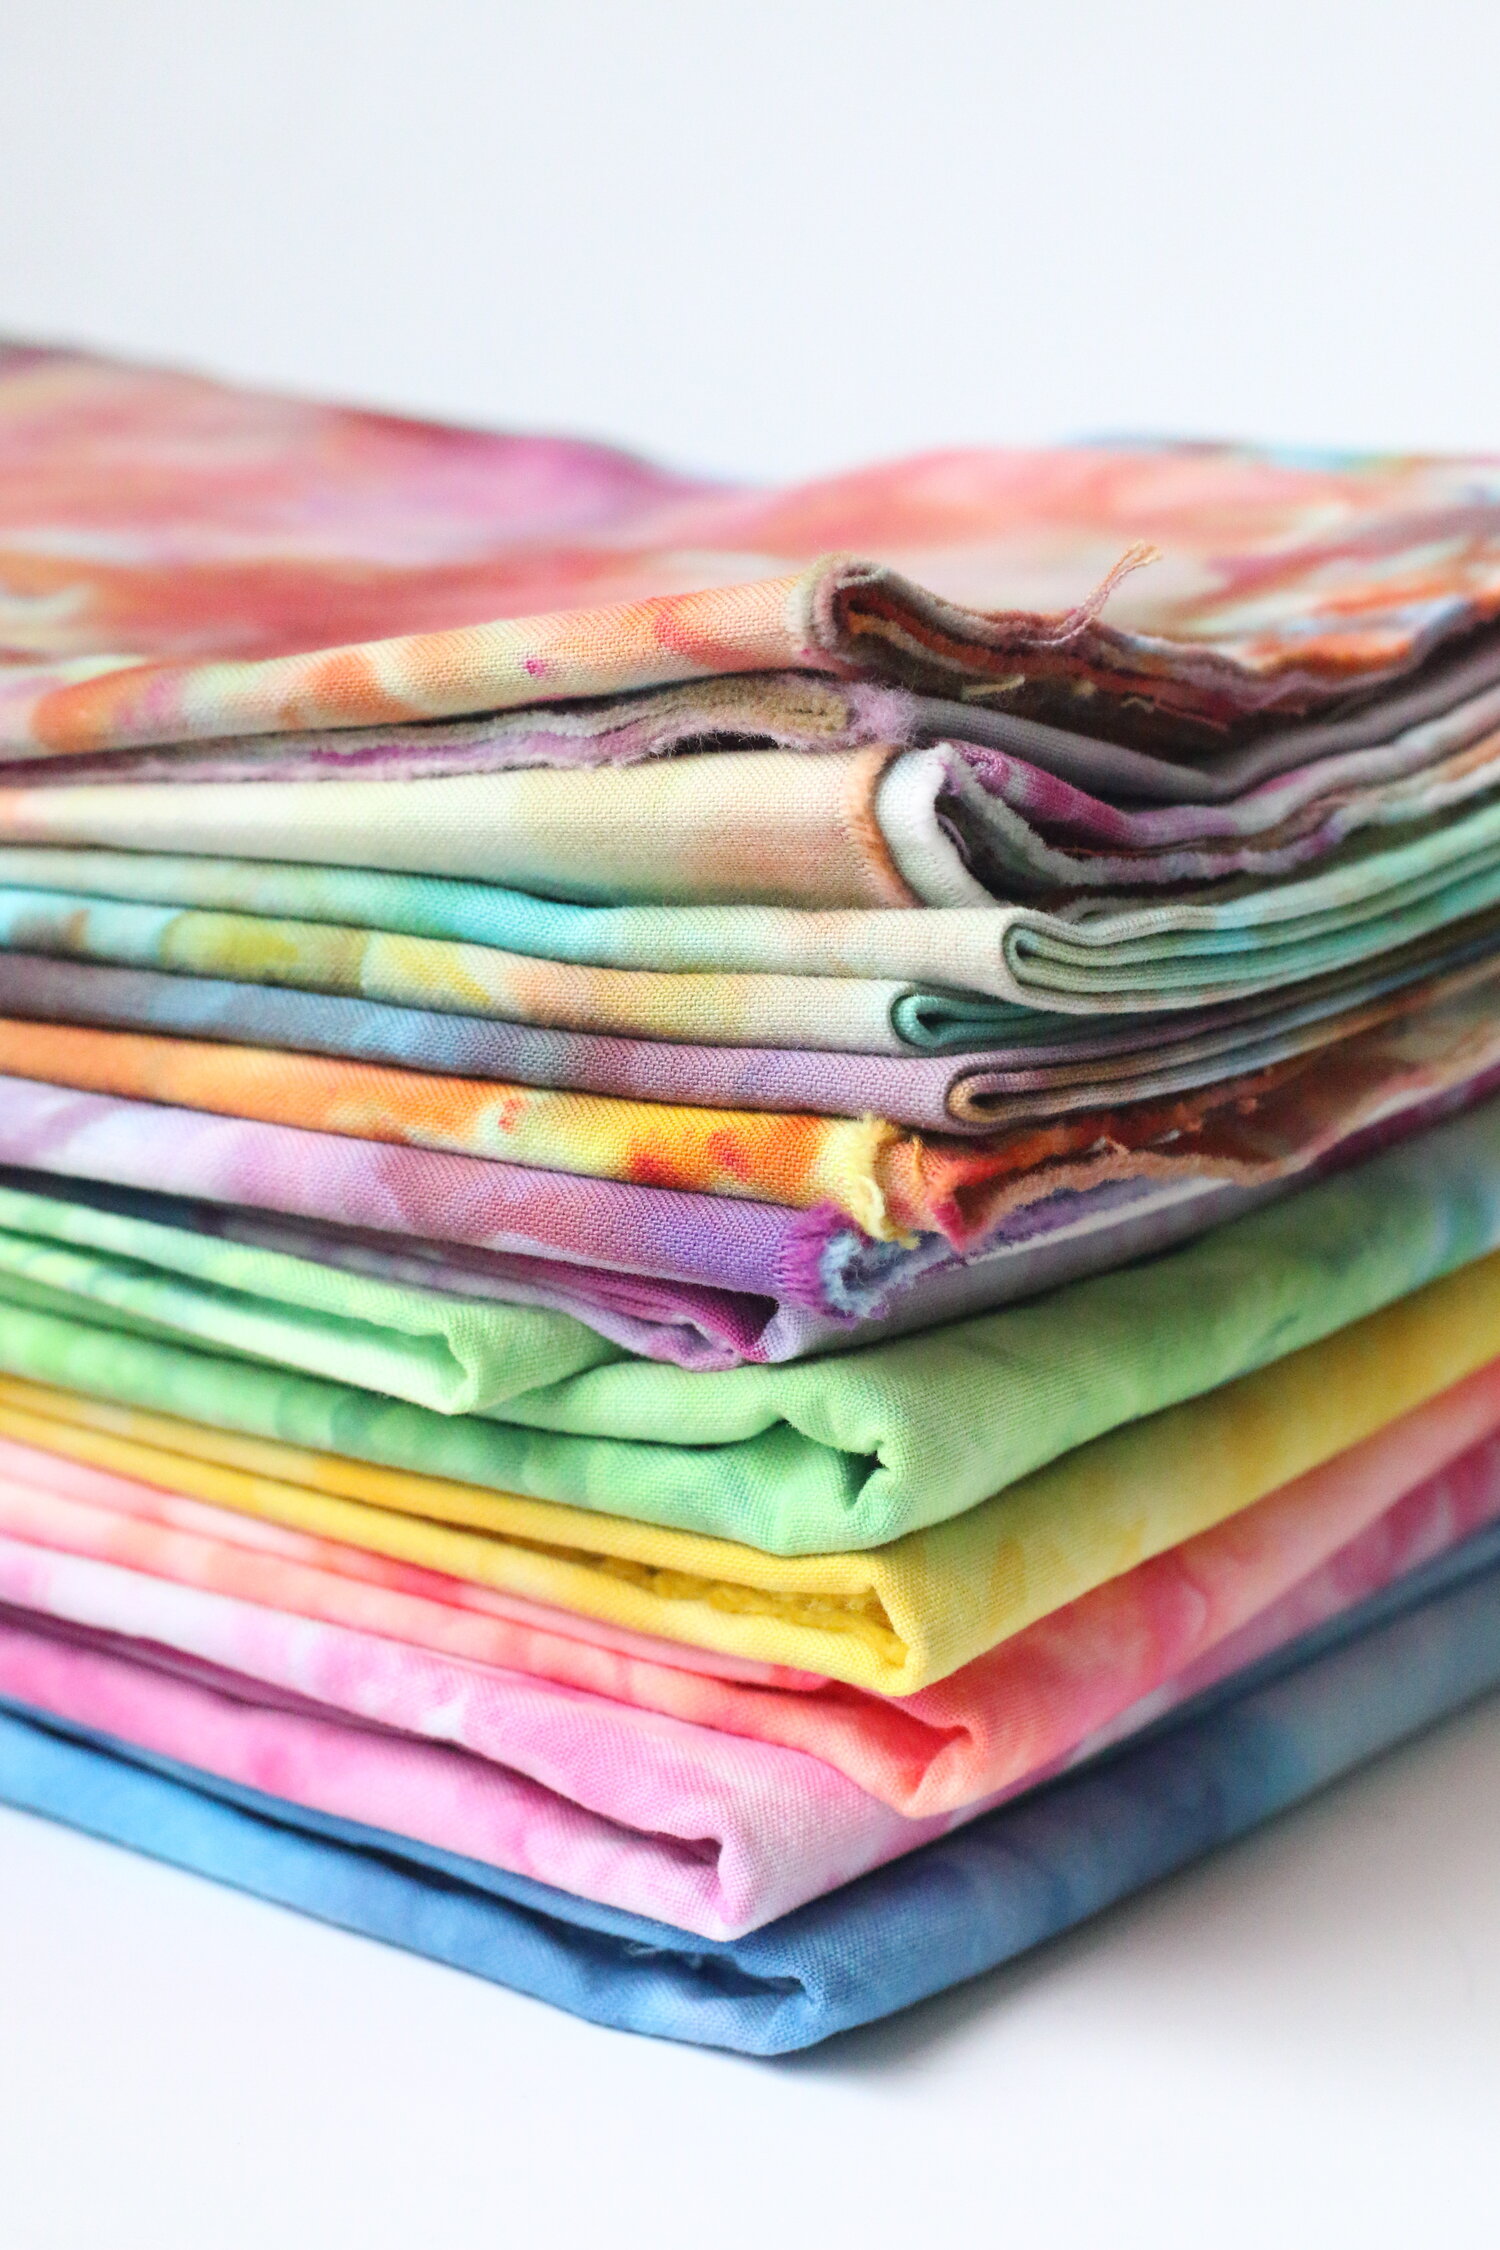 My prized collection of hand dyed fabrics.